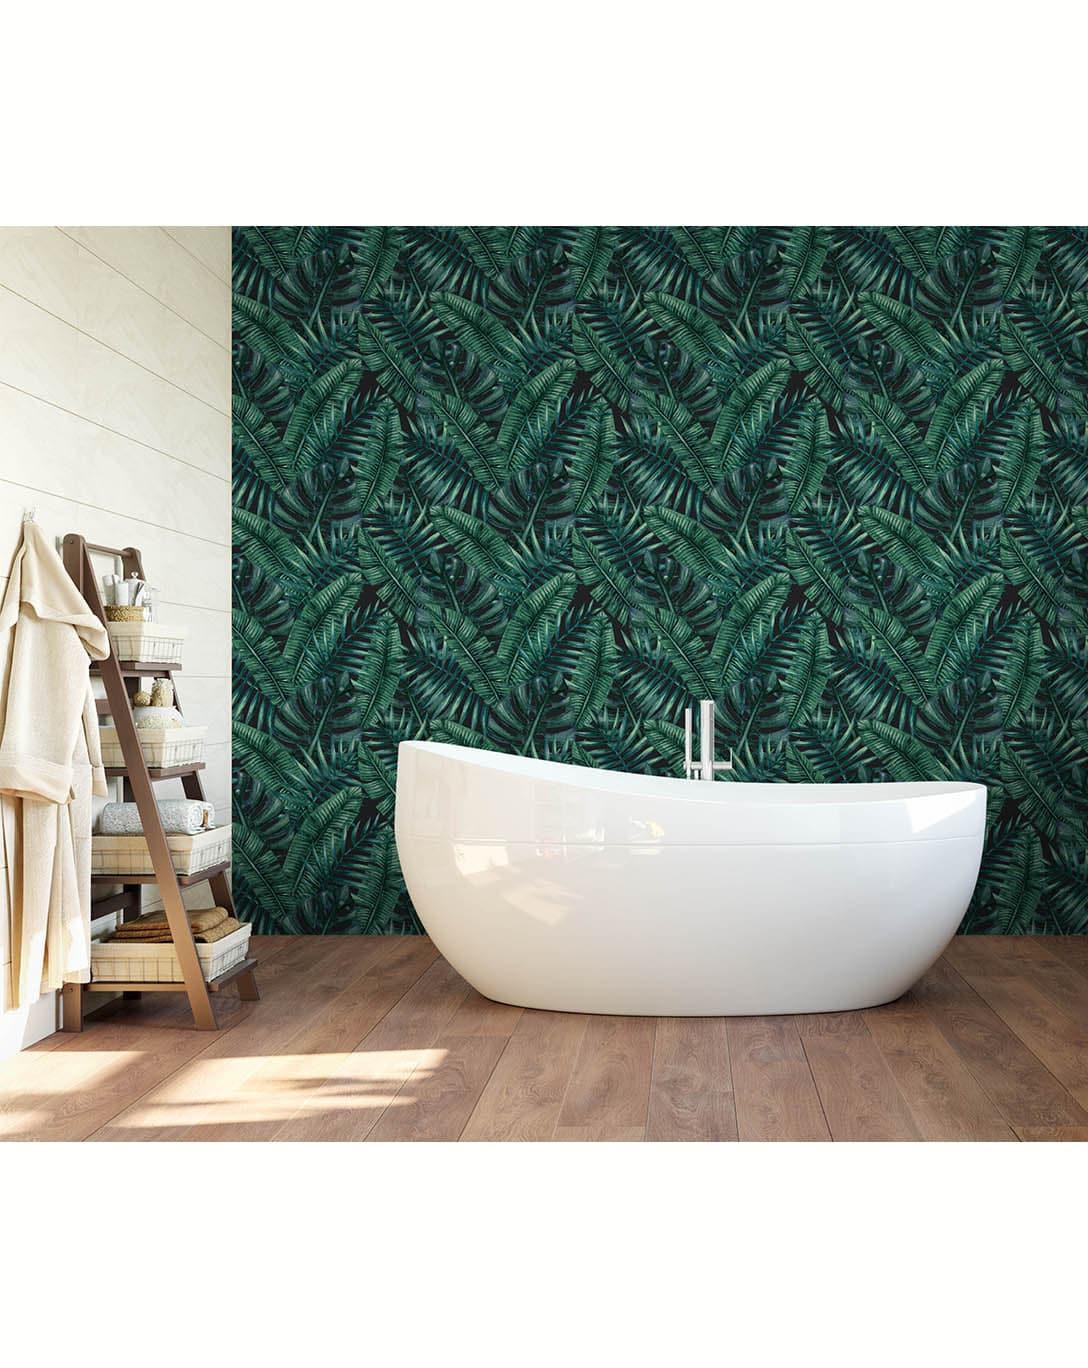 Tropical Jungle Monstera Palm Leaves Removable Wallpaper 